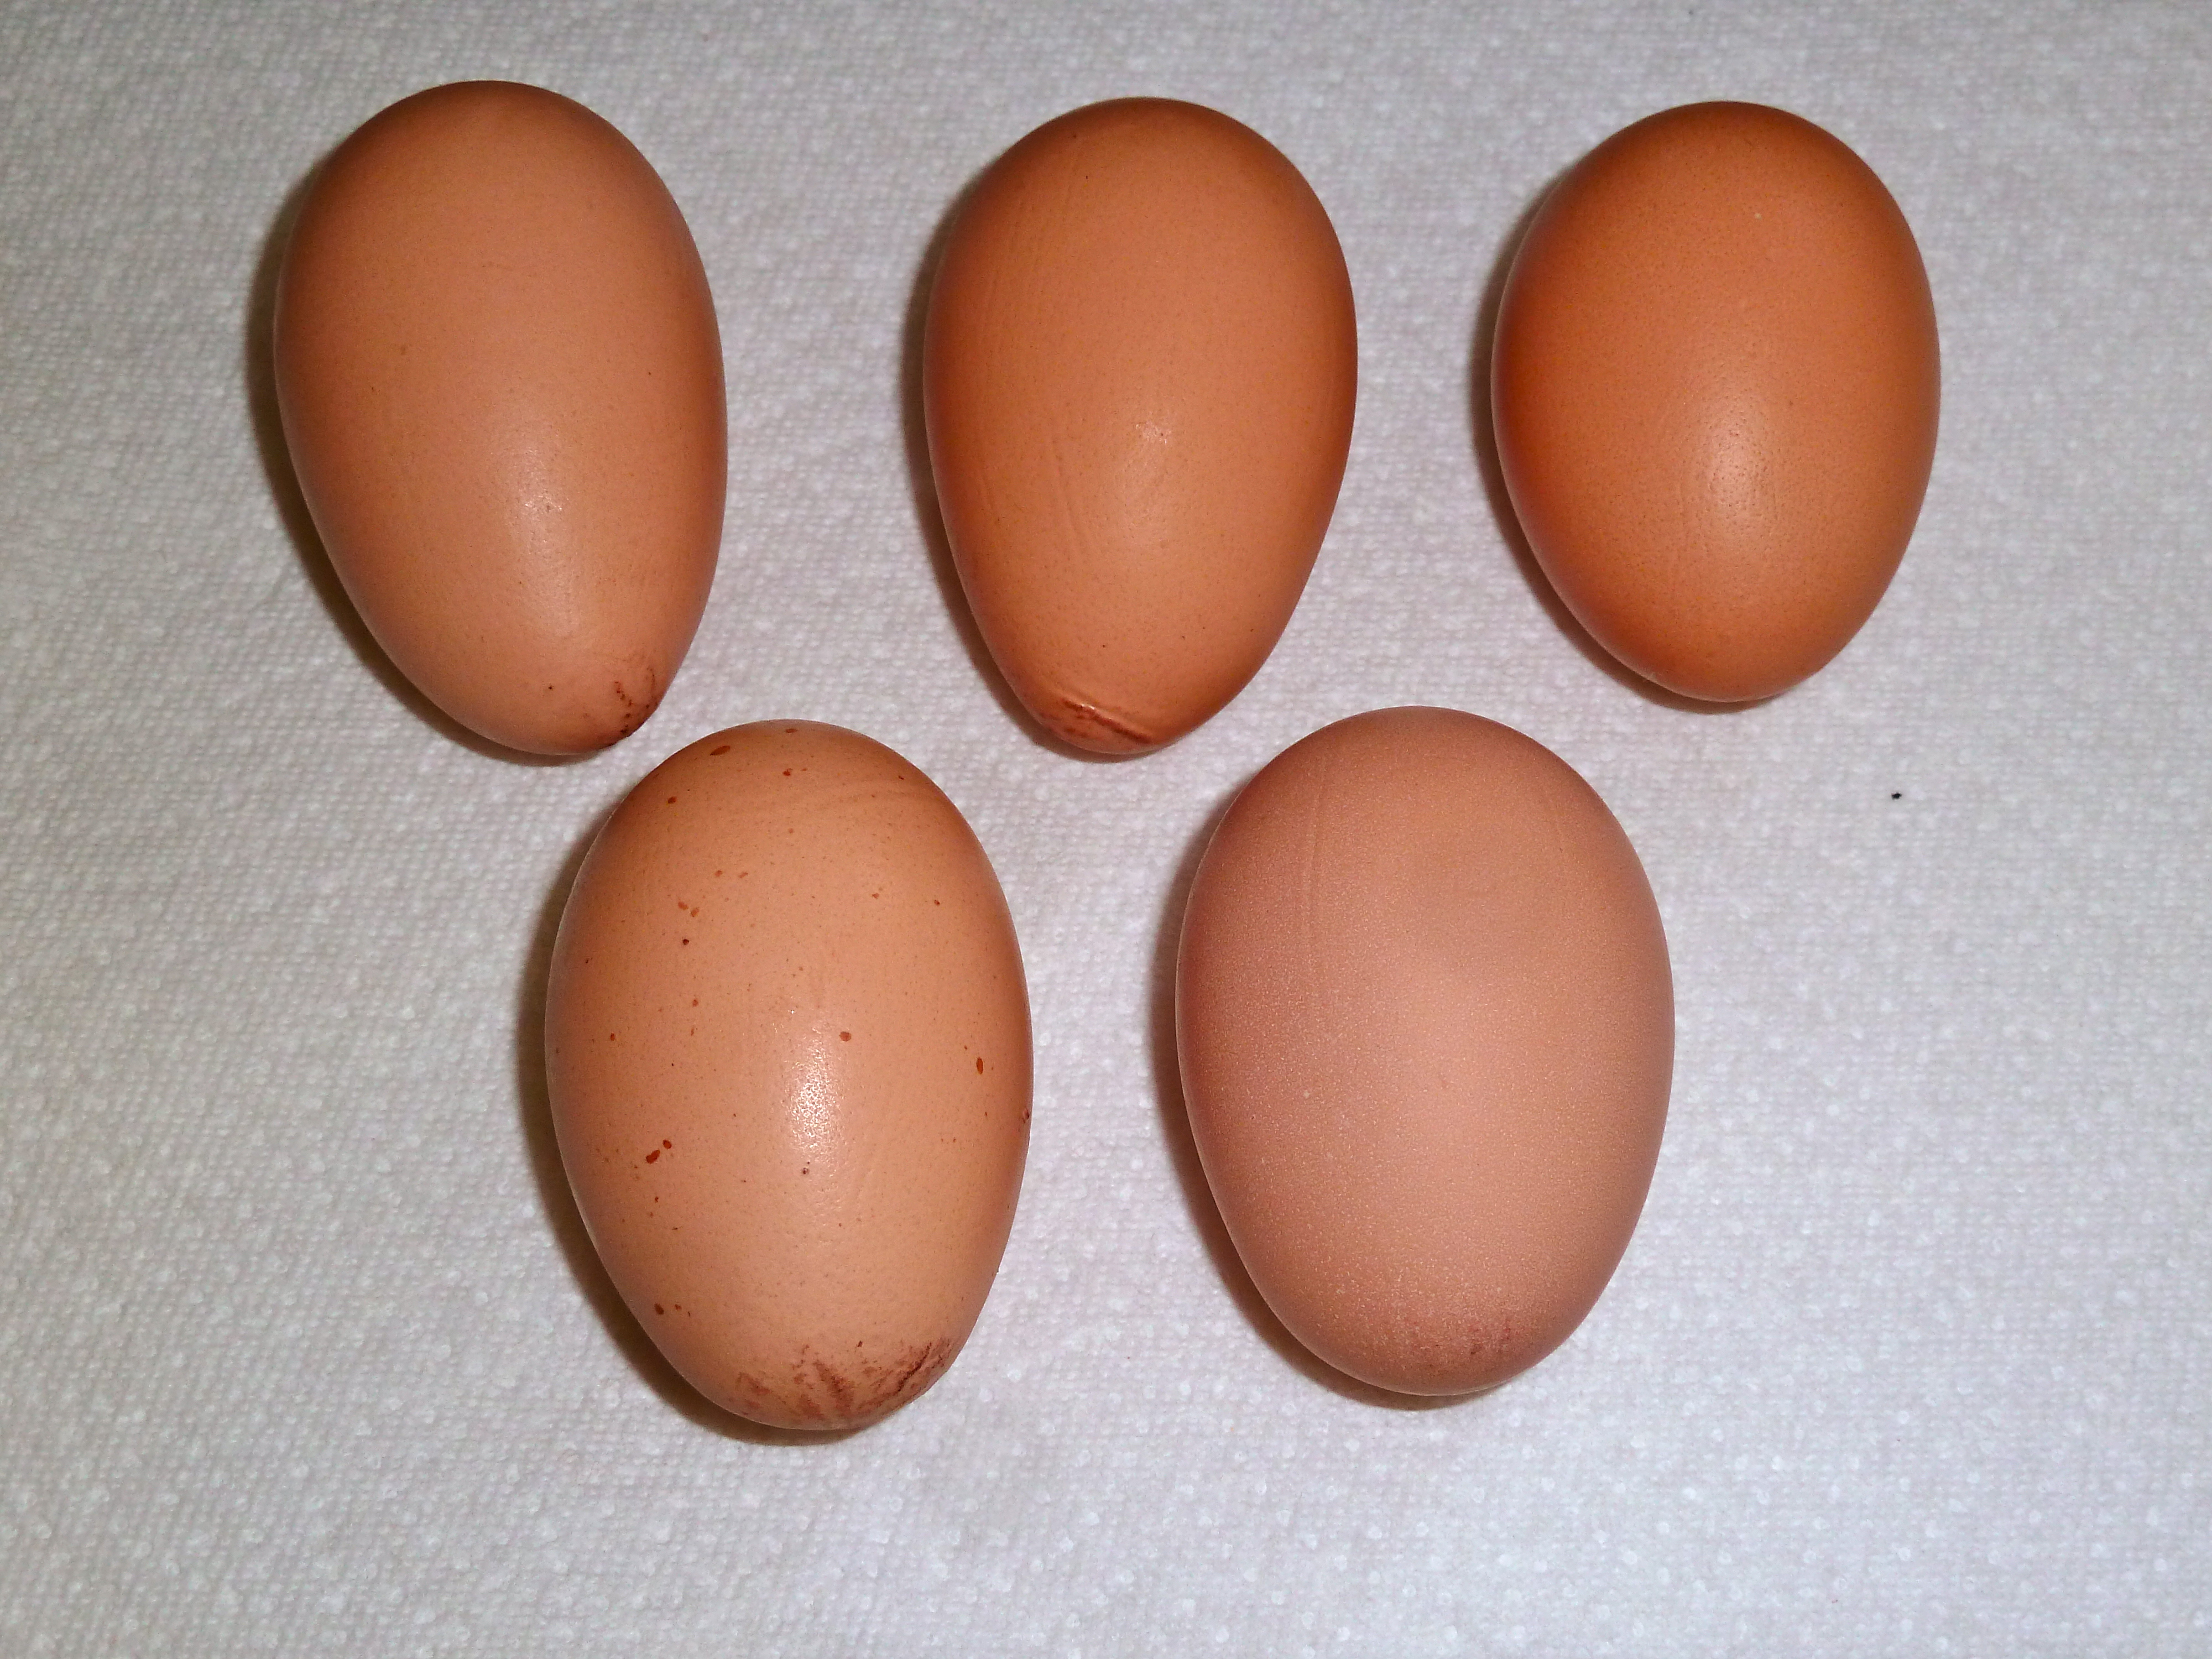 Our first five eggs. From left to right. July 30 (discovered at 8 pm in center egg box), July 31 (found at 4 pm. Laid after 10:30 am in left egg box), Aug. 1 (found at 4 pm in center. Laid after 2 pm.), Aug. 3 (found in center at 7:40 am and still warm. Laid after 6:30 am.), Aug. 4 (in center, laid after 7:30 am and found at 9:15 am). All had normal small yolks. I did observe Peach (21 week old Prod. Red) enter center egg box at 7:15 to lay the 5th egg. Also checked pubic bones and Peach's are widest (almost 3 fingers) and next up is actually Alaska (19 week old Black Australorp) at 2 1/2 fingers.